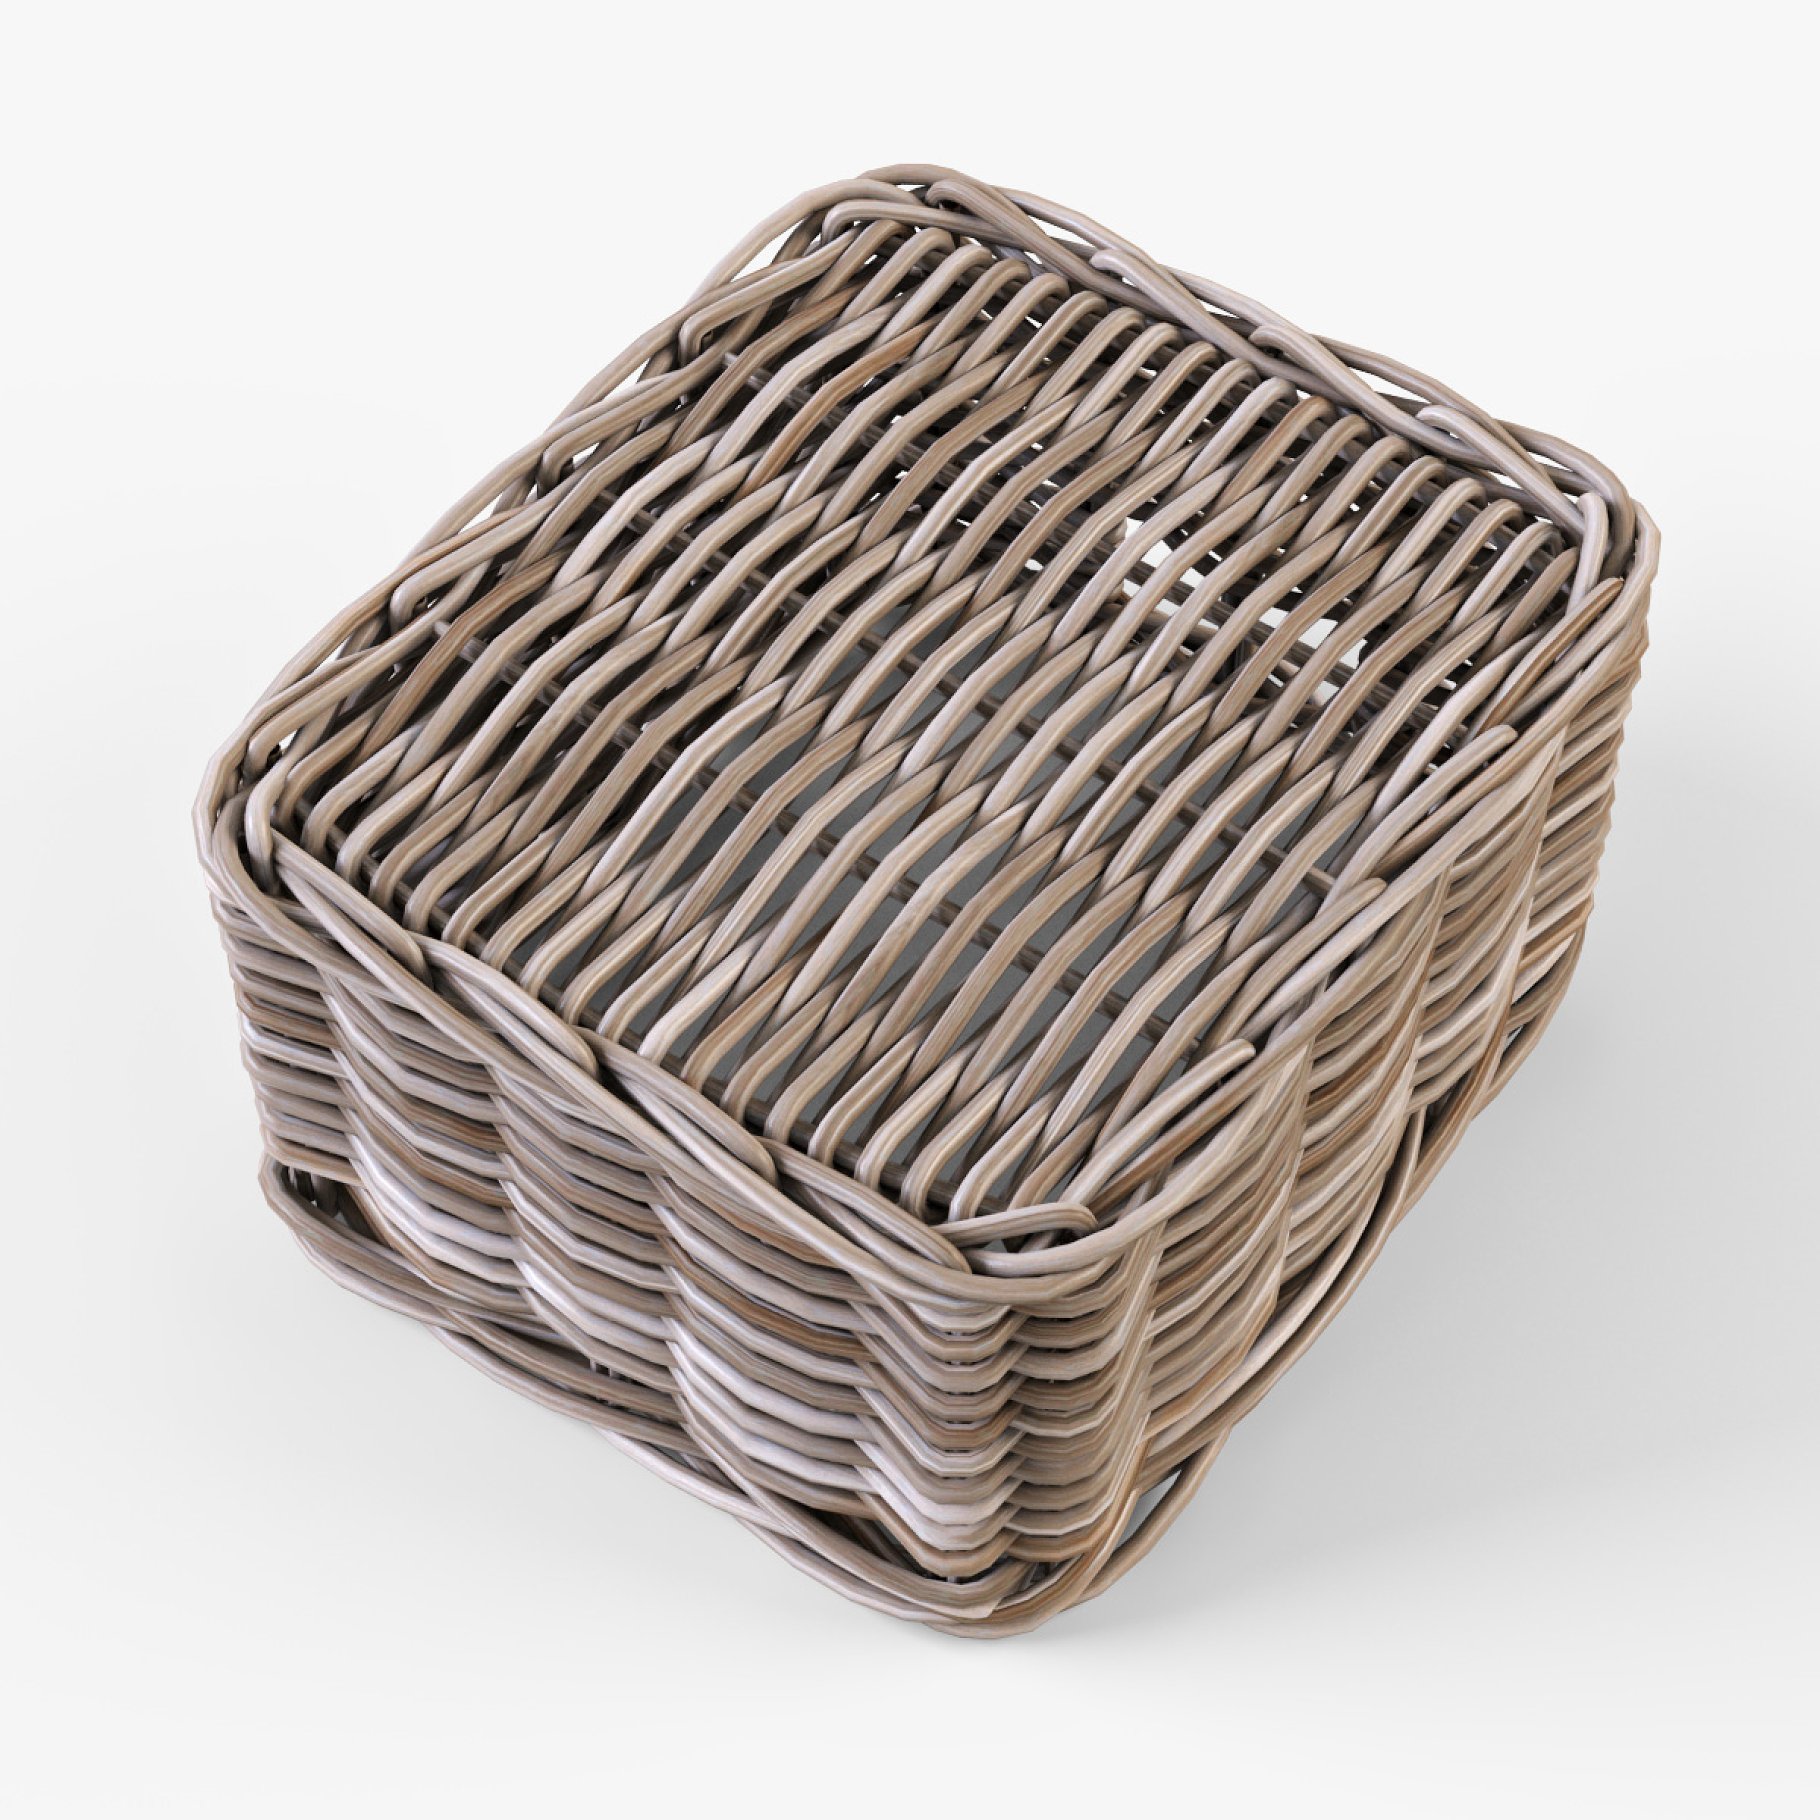 An inverted empty basket of apples.